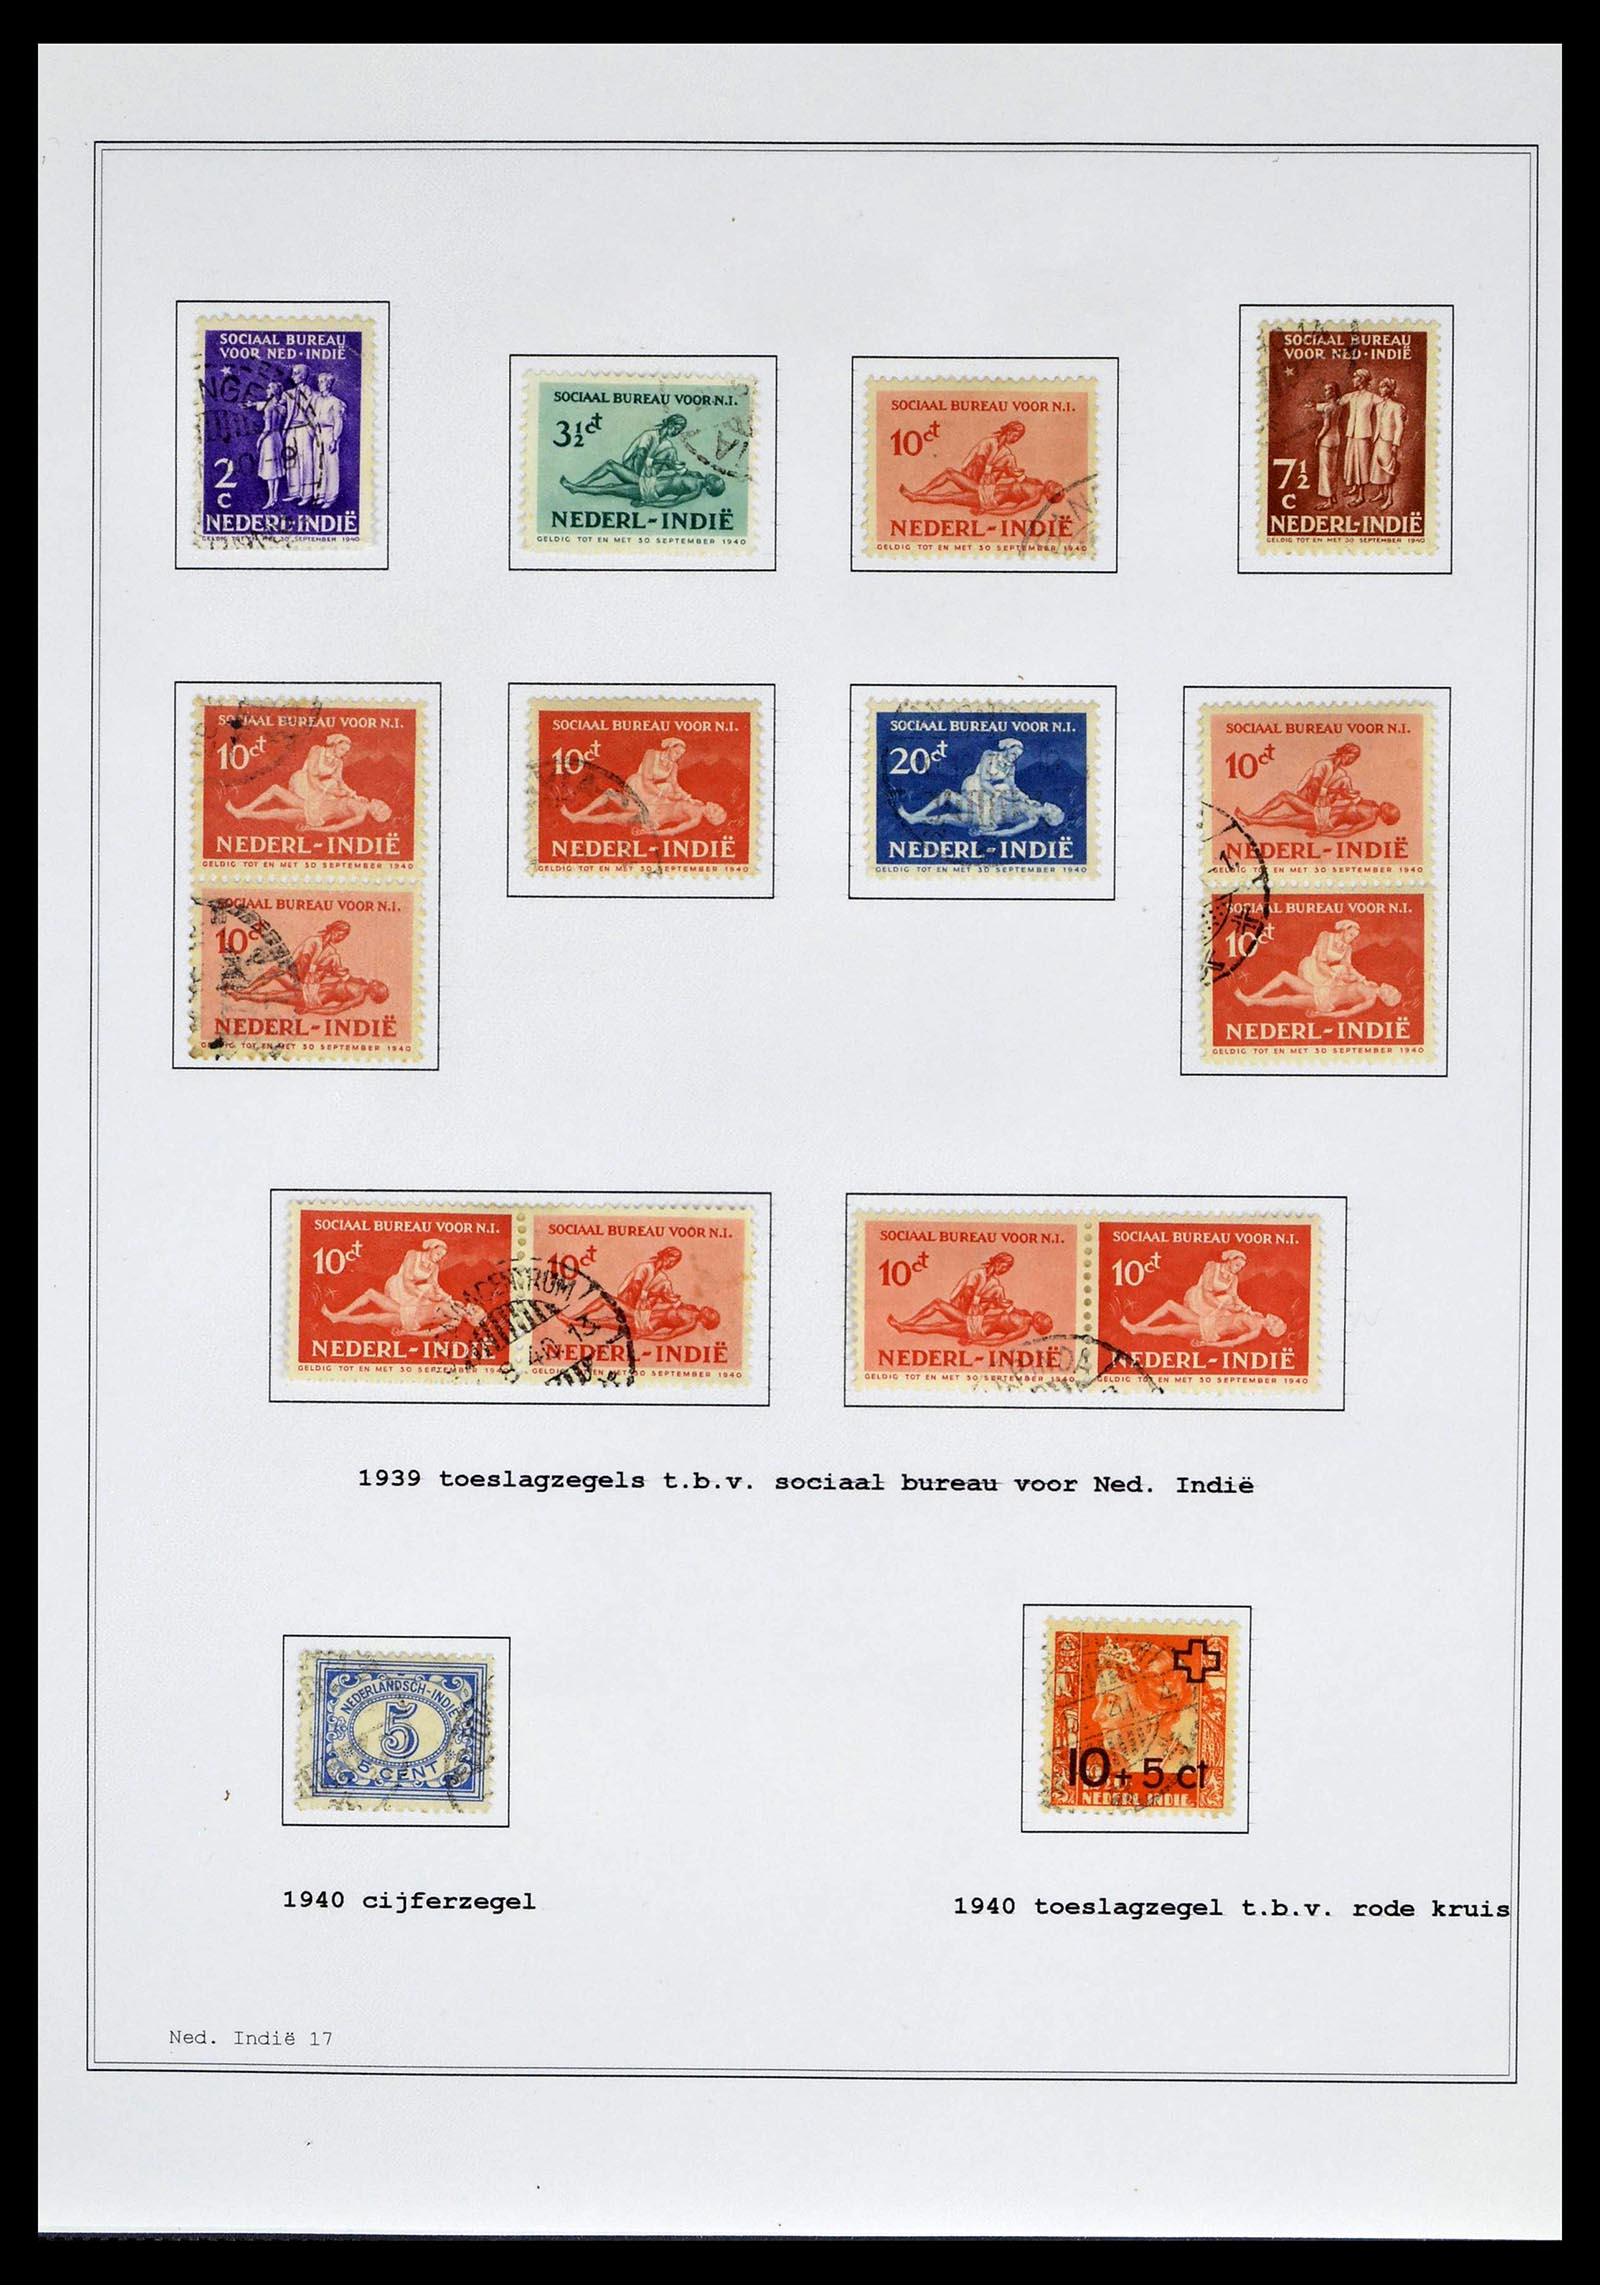 39026 0034 - Stamp collection 39026 Dutch east Indies and Suriname 1864-1975.